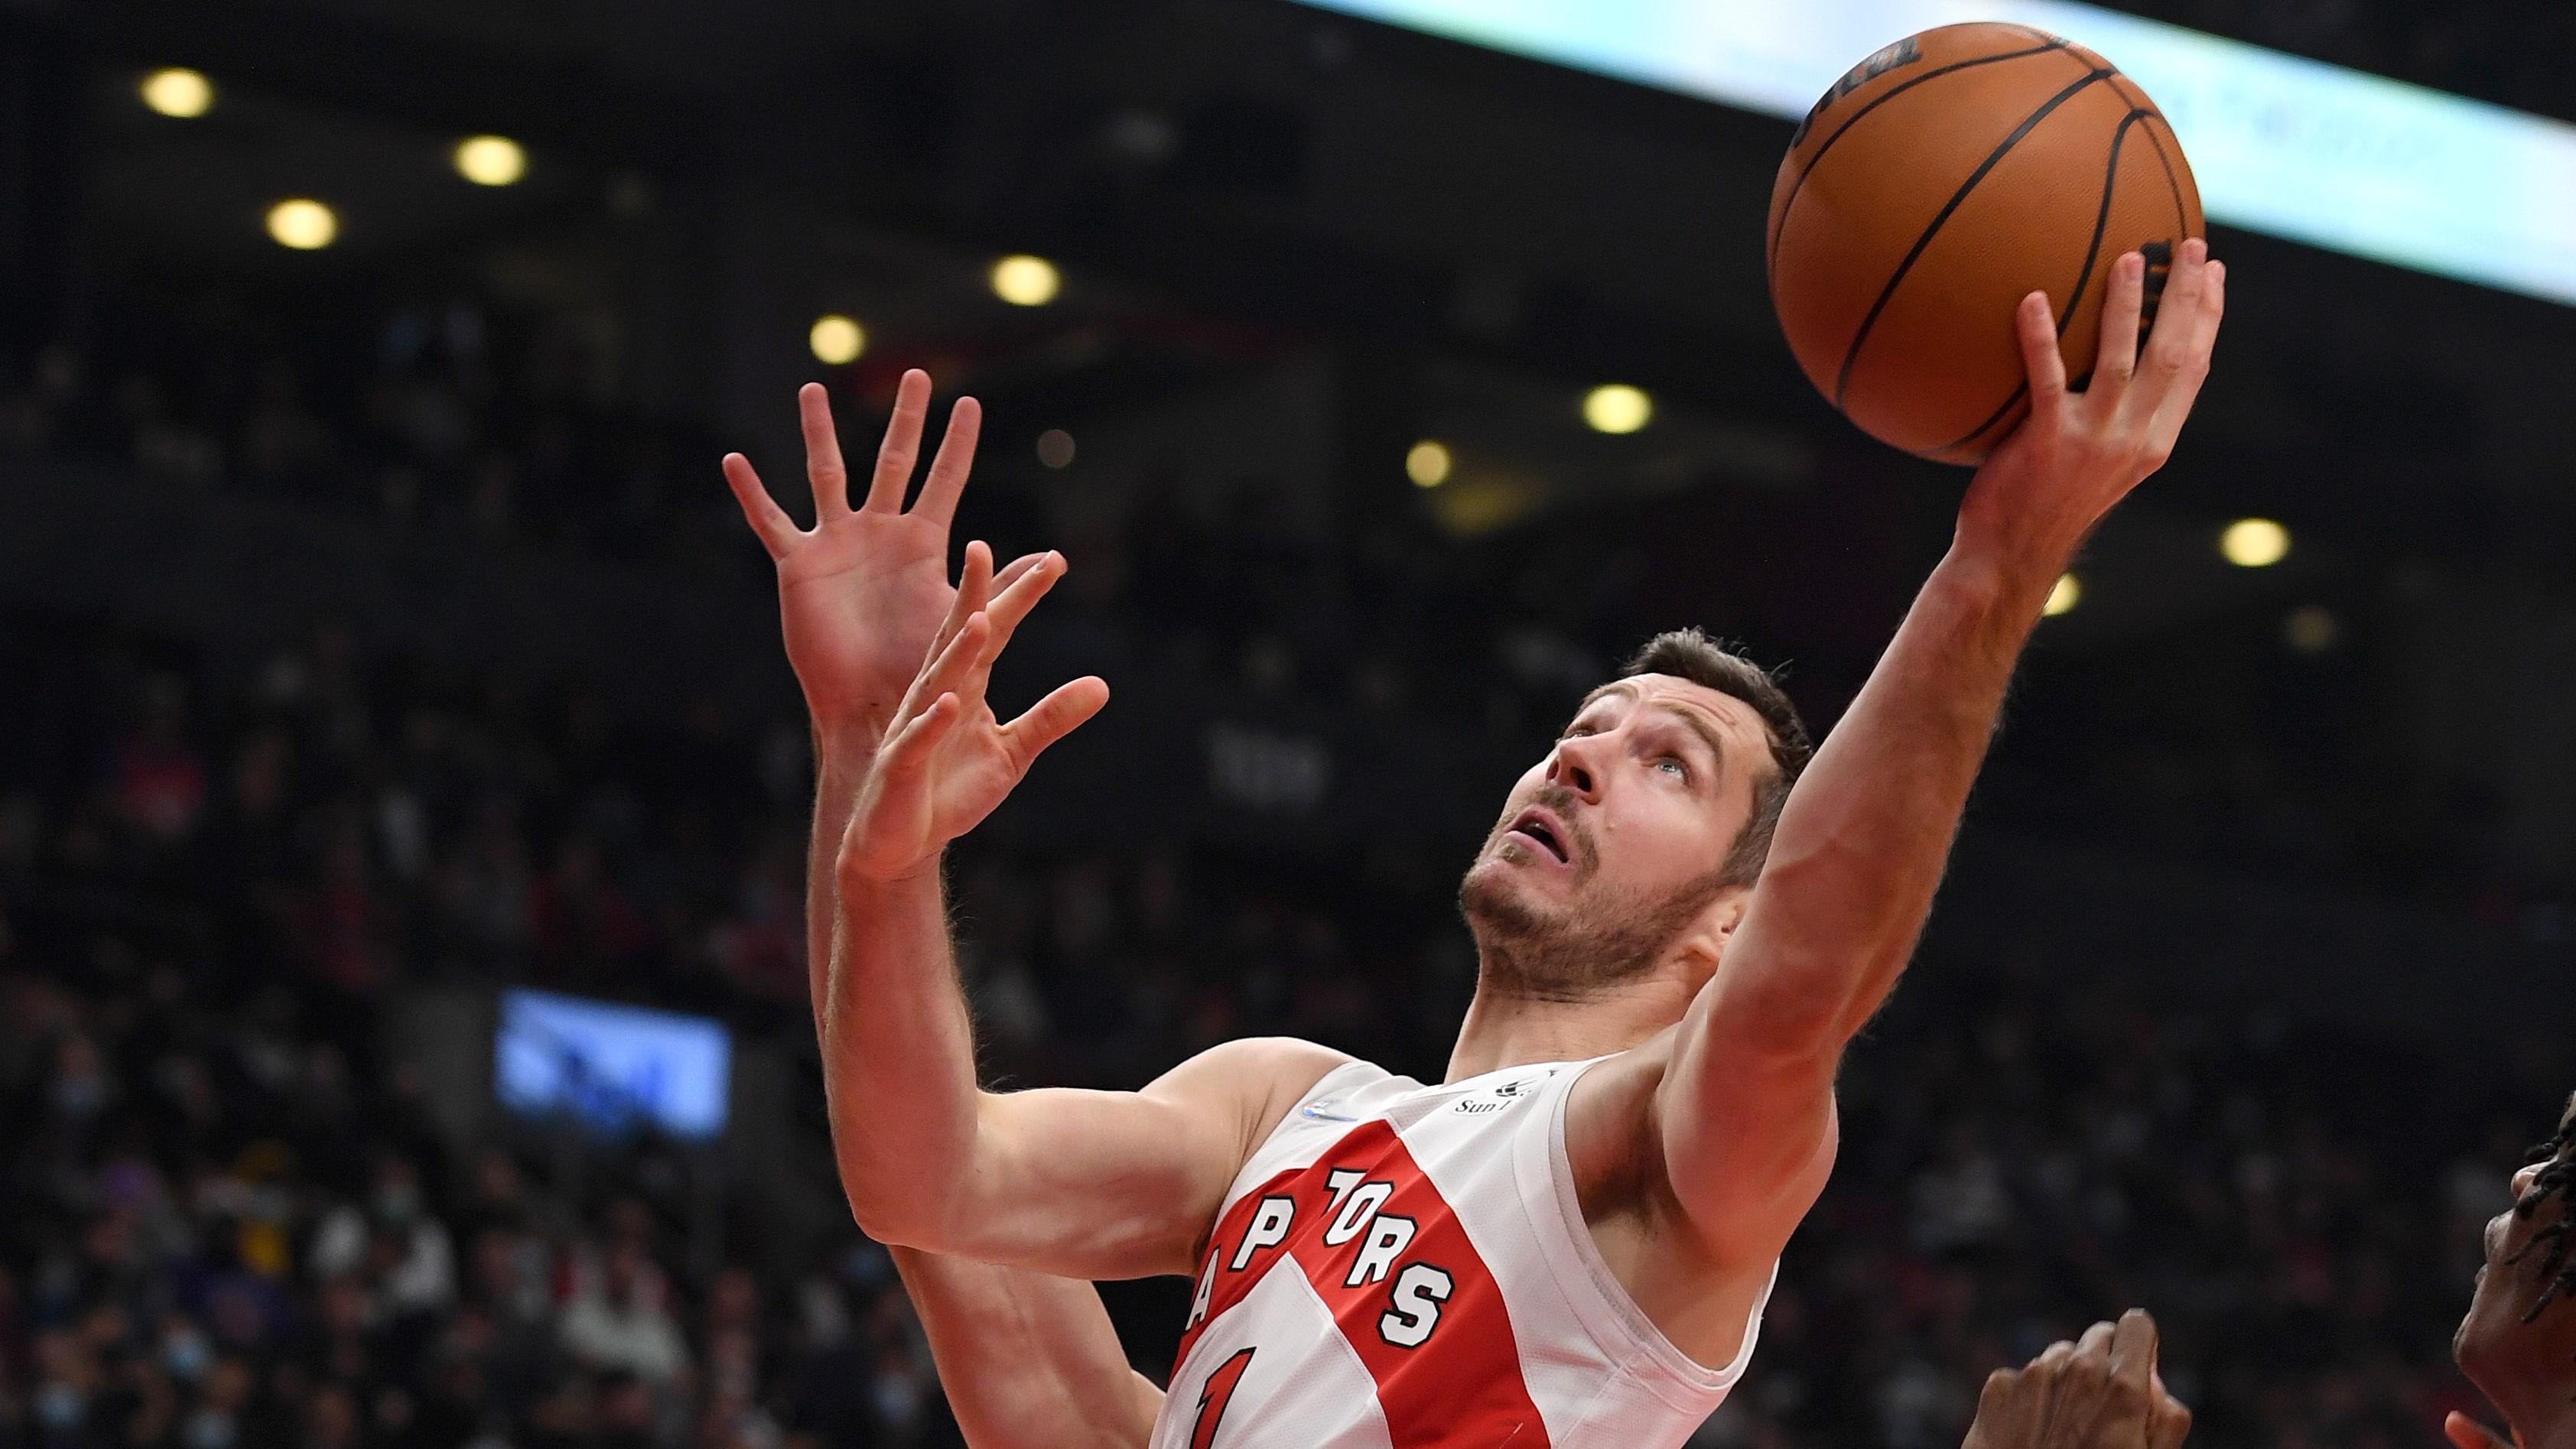 Toronto Raptors guard Goran Dragic (1) goes to the basket against Chicago Bulls in the first half at Scotiabank Arena. / Dan Hamilton - USA TODAY Sports